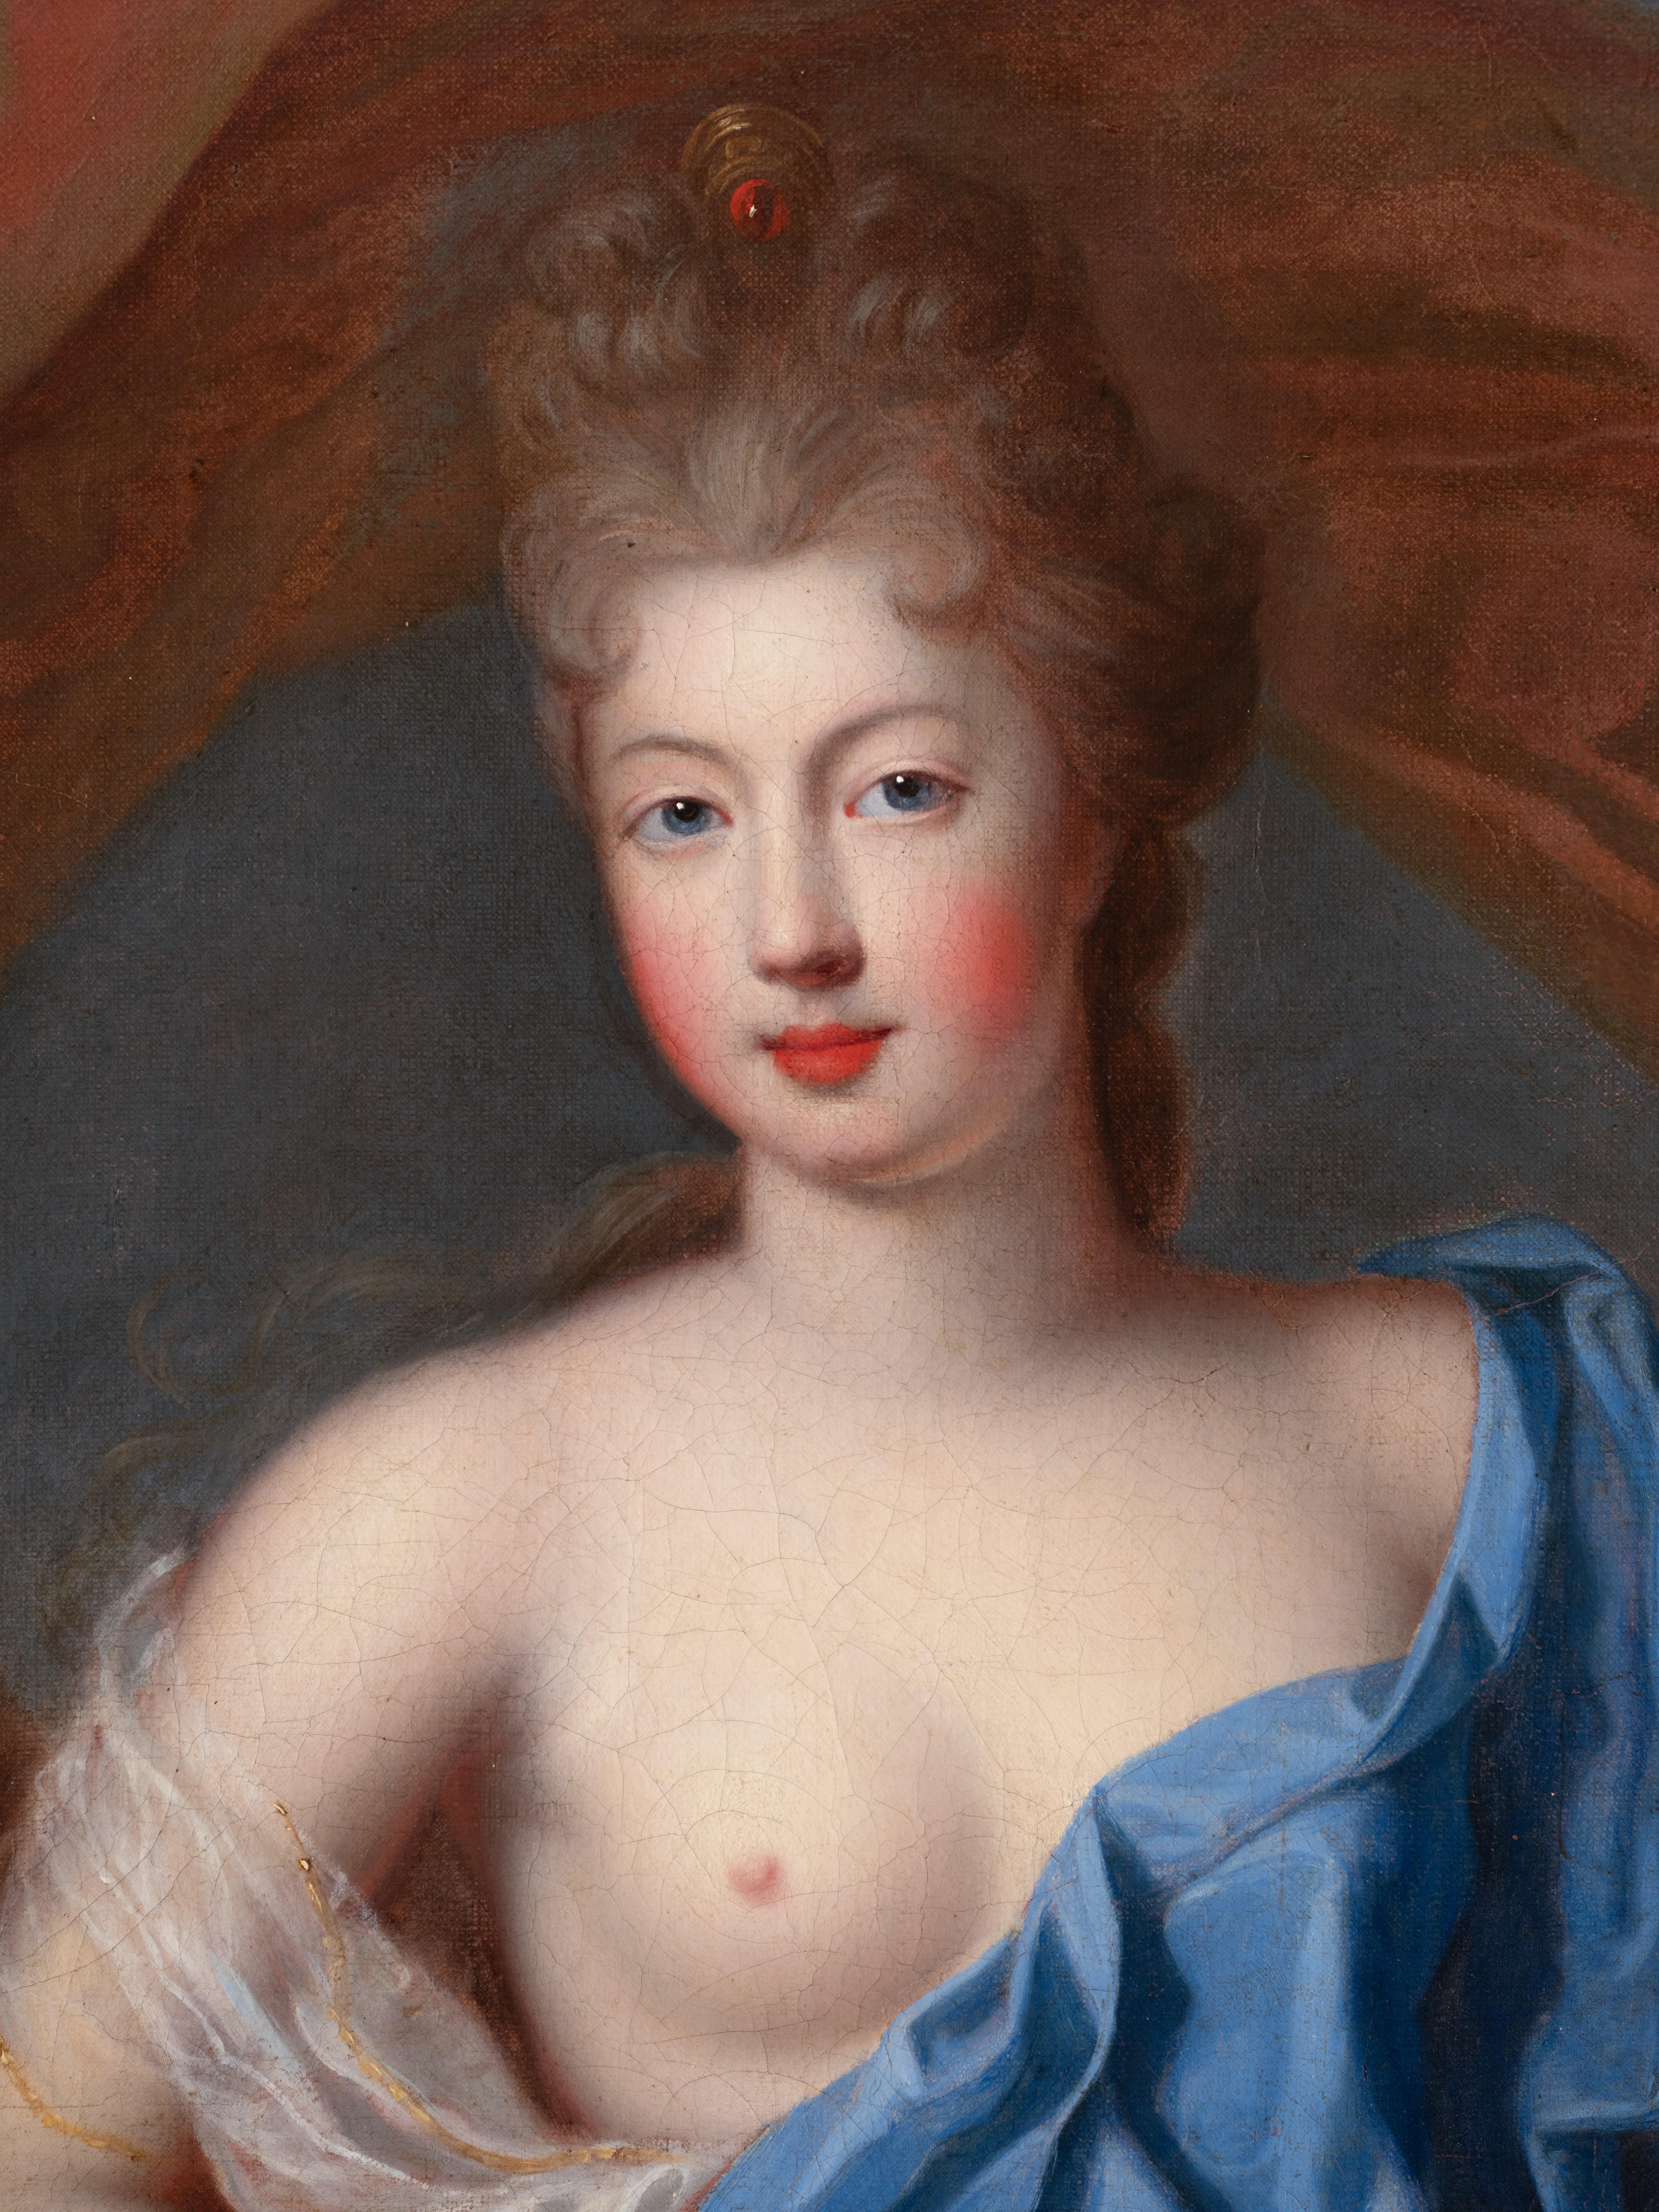 Late 17th century portrait of a French princess, daughter of Louis XIV For Sale 2